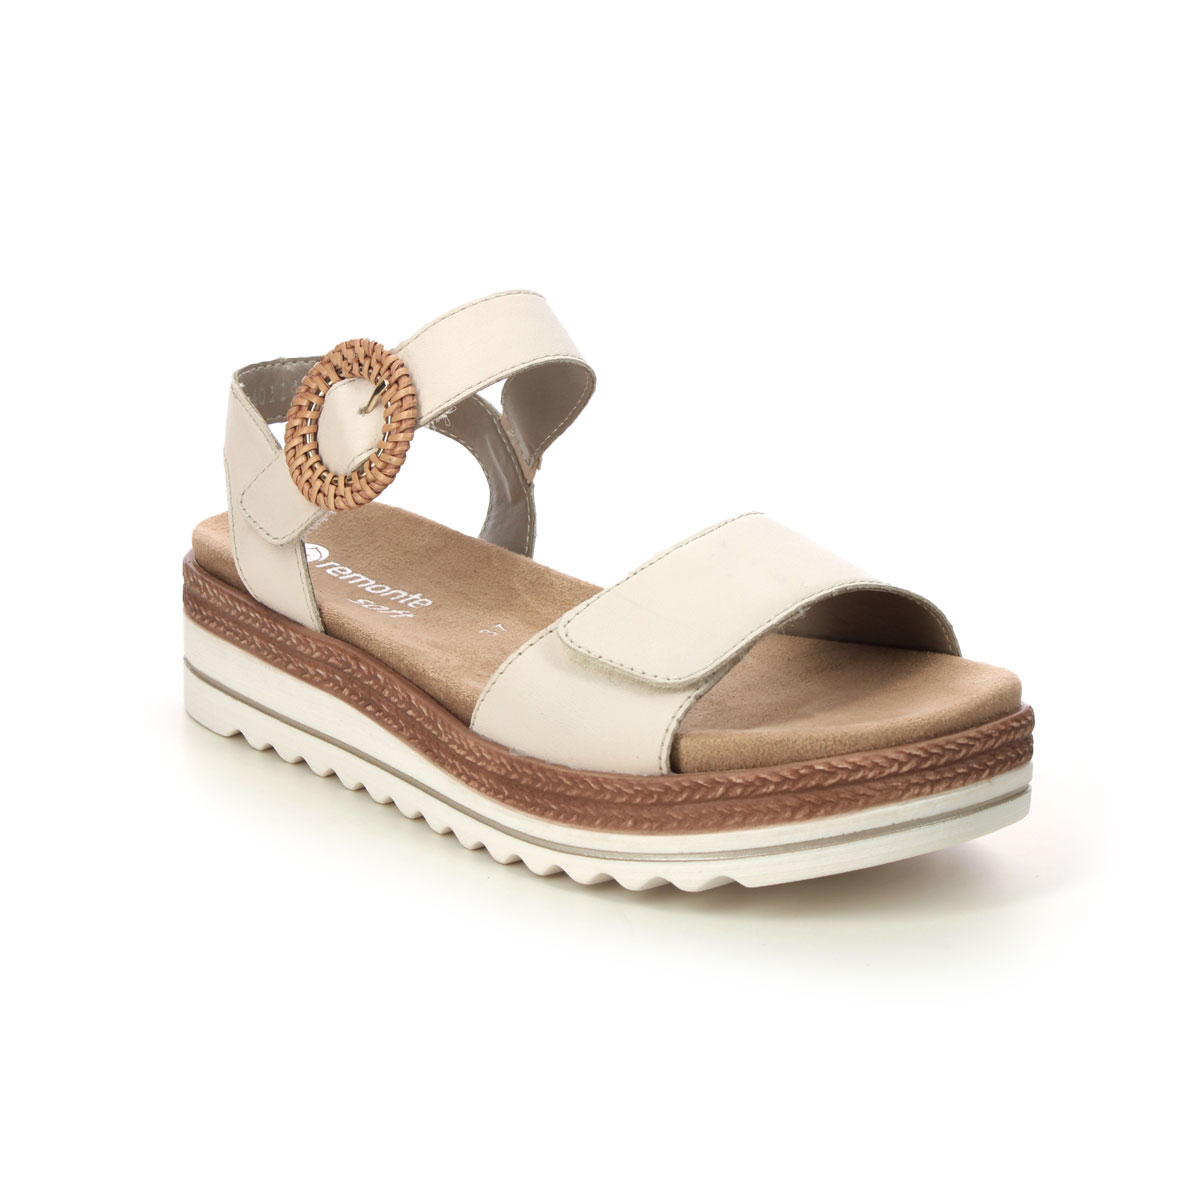 Remonte D0Q52-60 Bily  Flatform Off white Womens Flat Sandals in a Plain Leather in Size 42